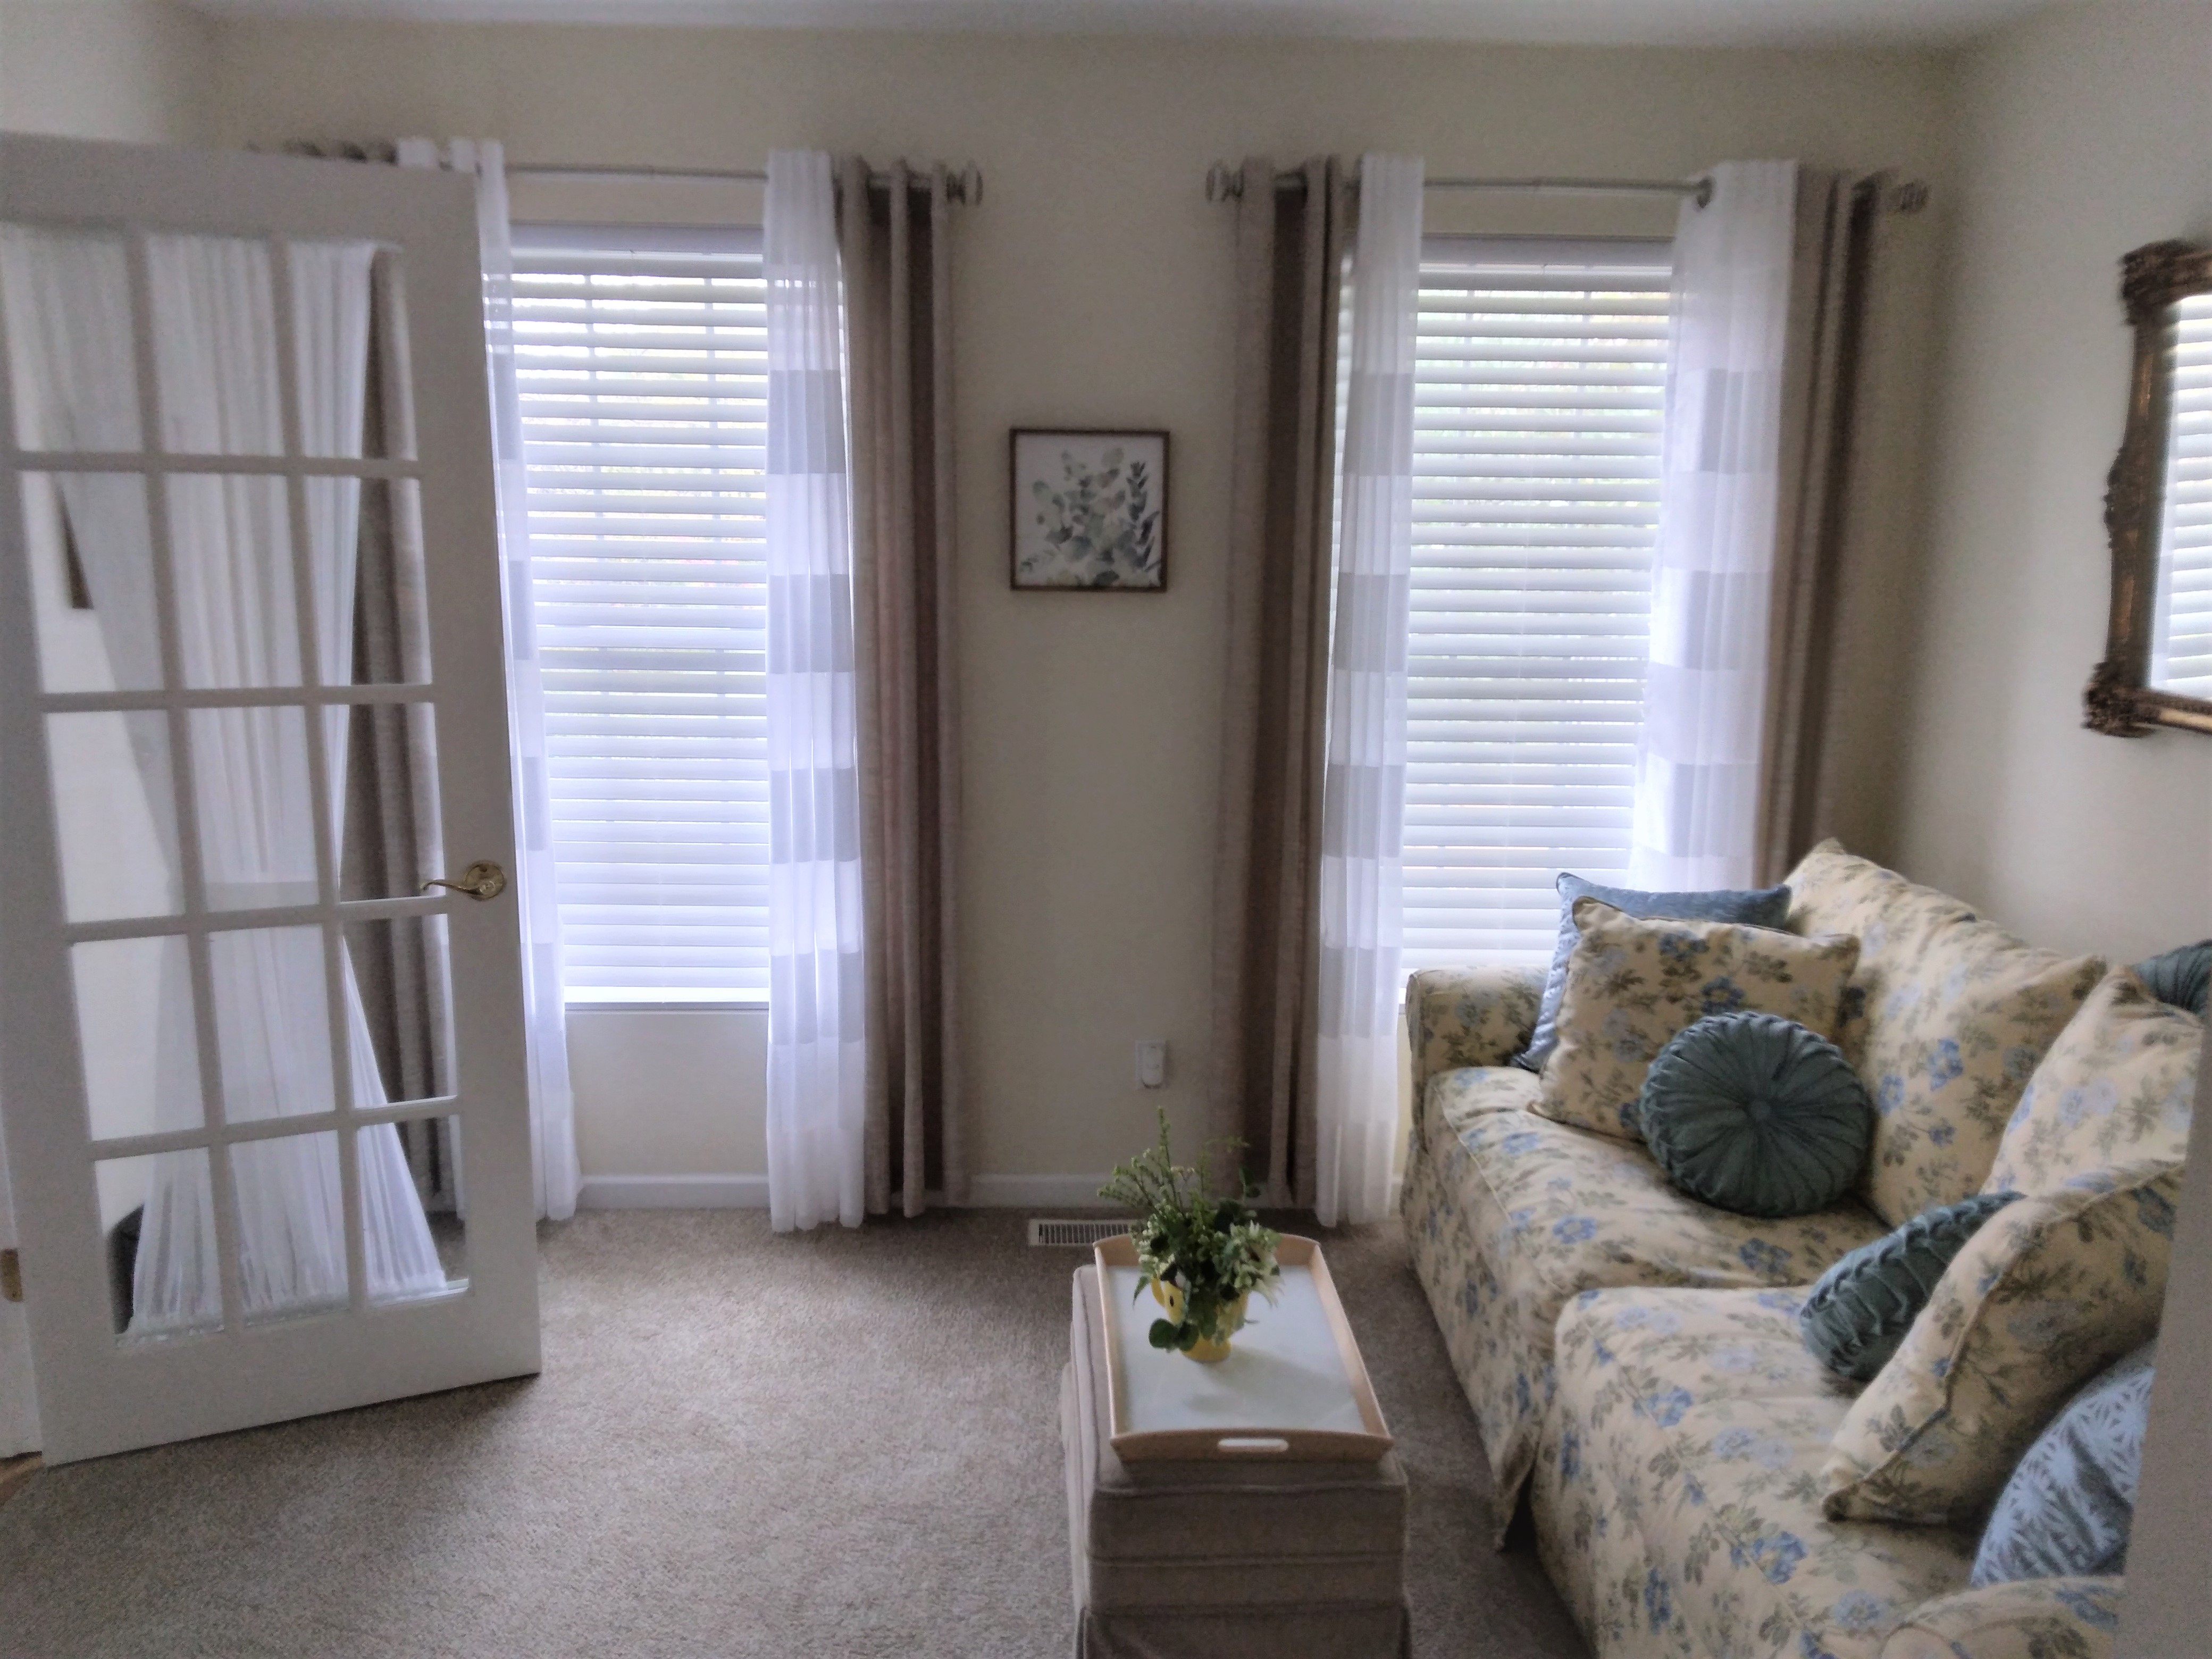 White, cordless faux wood blinds in Springfield Illinois living room.  BudgetBlinds  WindowCoverings  Blinds  SpringfieldIllinois